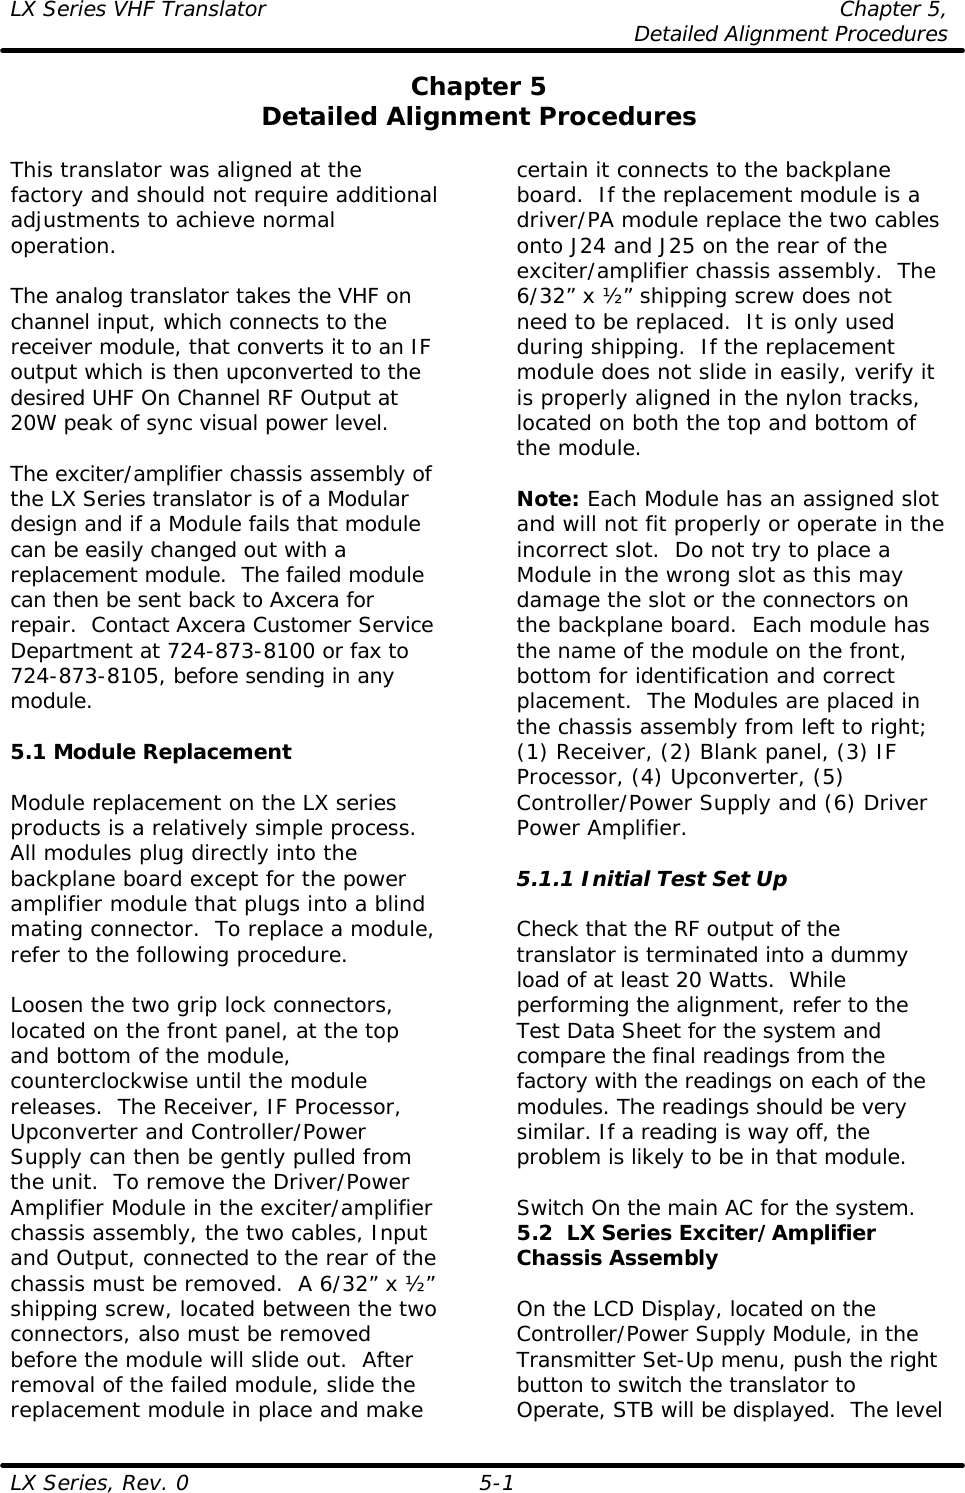 LX Series VHF Translator Chapter 5,  Detailed Alignment Procedures  LX Series, Rev. 0 5-1 Chapter 5 Detailed Alignment Procedures  This translator was aligned at the factory and should not require additional adjustments to achieve normal operation.  The analog translator takes the VHF on channel input, which connects to the receiver module, that converts it to an IF output which is then upconverted to the desired UHF On Channel RF Output at 20W peak of sync visual power level.   The exciter/amplifier chassis assembly of the LX Series translator is of a Modular design and if a Module fails that module can be easily changed out with a replacement module.  The failed module can then be sent back to Axcera for repair.  Contact Axcera Customer Service Department at 724-873-8100 or fax to 724-873-8105, before sending in any module.  5.1 Module Replacement  Module replacement on the LX series products is a relatively simple process. All modules plug directly into the backplane board except for the power amplifier module that plugs into a blind mating connector.  To replace a module, refer to the following procedure.  Loosen the two grip lock connectors, located on the front panel, at the top and bottom of the module, counterclockwise until the module releases.  The Receiver, IF Processor, Upconverter and Controller/Power Supply can then be gently pulled from the unit.  To remove the Driver/Power Amplifier Module in the exciter/amplifier chassis assembly, the two cables, Input and Output, connected to the rear of the chassis must be removed.  A 6/32” x ½” shipping screw, located between the two connectors, also must be removed before the module will slide out.  After removal of the failed module, slide the replacement module in place and make certain it connects to the backplane board.  If the replacement module is a driver/PA module replace the two cables onto J24 and J25 on the rear of the exciter/amplifier chassis assembly.  The 6/32” x ½” shipping screw does not need to be replaced.  It is only used during shipping.  If the replacement module does not slide in easily, verify it is properly aligned in the nylon tracks, located on both the top and bottom of the module.  Note: Each Module has an assigned slot and will not fit properly or operate in the incorrect slot.  Do not try to place a Module in the wrong slot as this may damage the slot or the connectors on the backplane board.  Each module has the name of the module on the front, bottom for identification and correct placement.  The Modules are placed in the chassis assembly from left to right; (1) Receiver, (2) Blank panel, (3) IF Processor, (4) Upconverter, (5) Controller/Power Supply and (6) Driver Power Amplifier.  5.1.1 Initial Test Set Up  Check that the RF output of the translator is terminated into a dummy load of at least 20 Watts.  While performing the alignment, refer to the Test Data Sheet for the system and compare the final readings from the factory with the readings on each of the modules. The readings should be very similar. If a reading is way off, the problem is likely to be in that module.  Switch On the main AC for the system. 5.2  LX Series Exciter/Amplifier Chassis Assembly  On the LCD Display, located on the Controller/Power Supply Module, in the Transmitter Set-Up menu, push the right button to switch the translator to Operate, STB will be displayed.  The level 